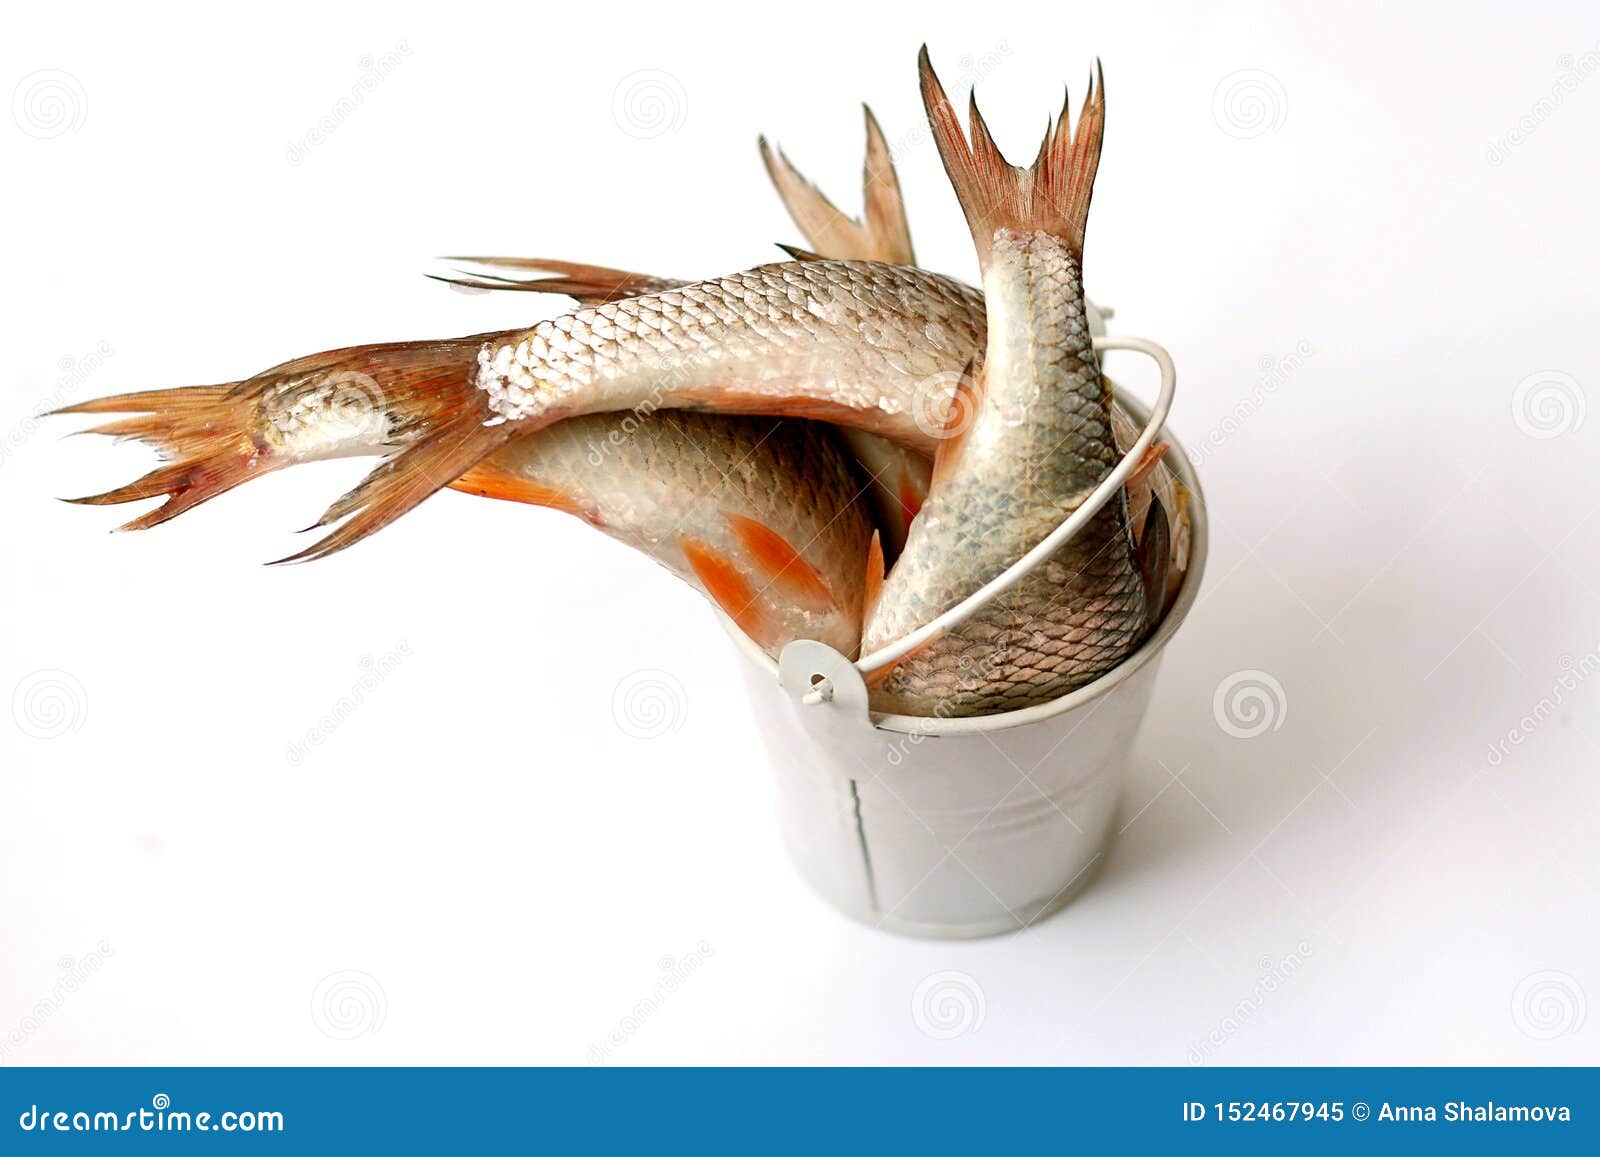 A Full Bucket of Freshly Caught Perch. Top View Stock Image - Image of  container, saltwater: 152467945